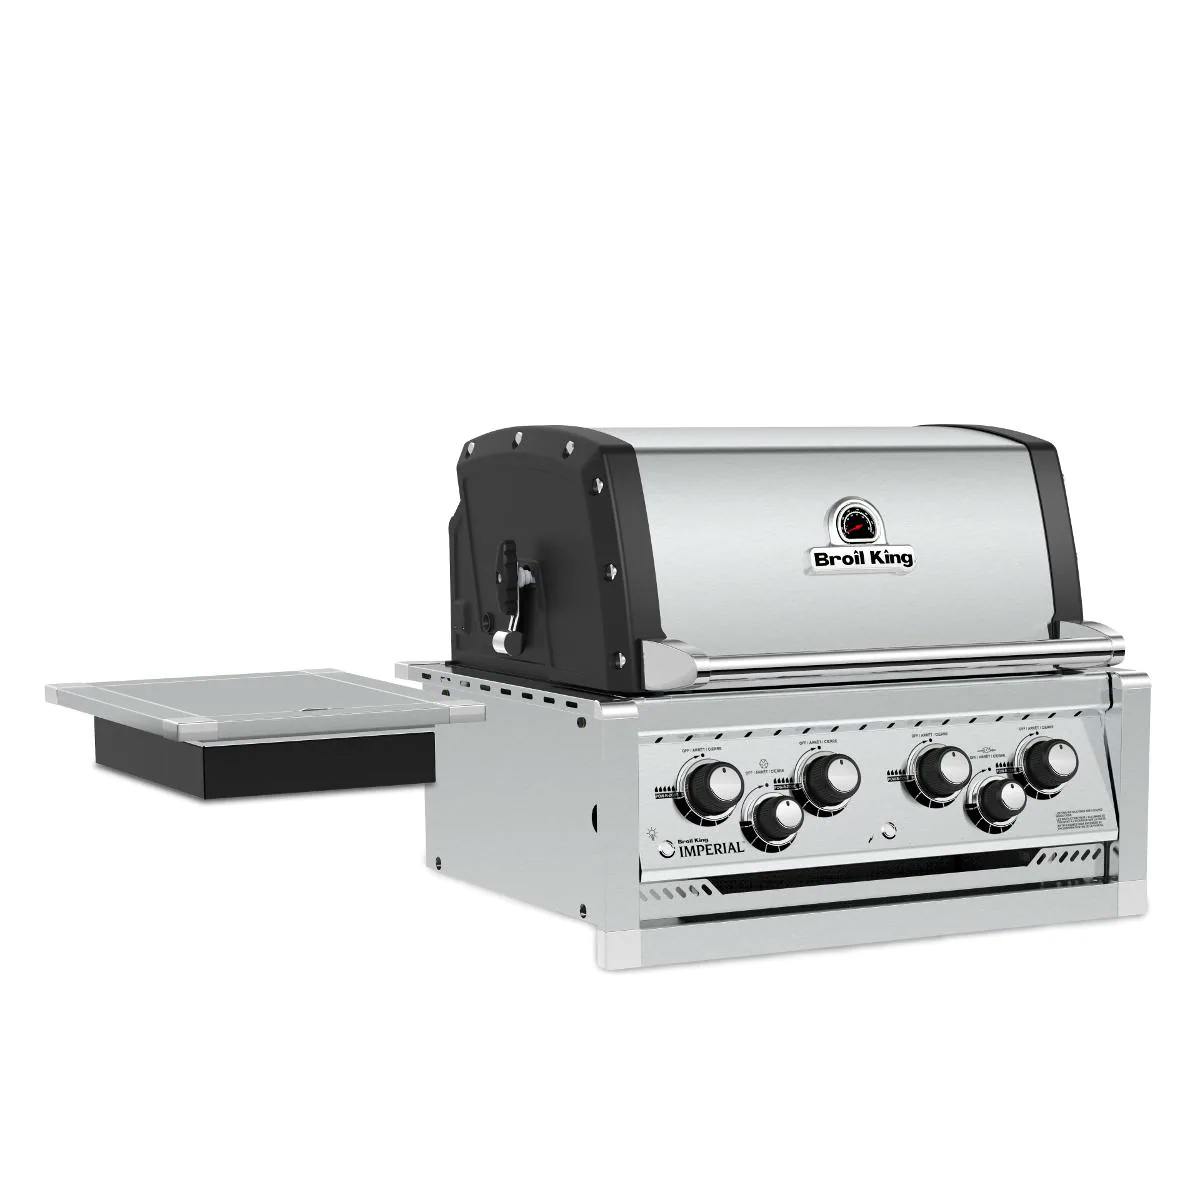 Broil King Imperial 490 Built-in Gas Grill with Rotisserie & Side Burner